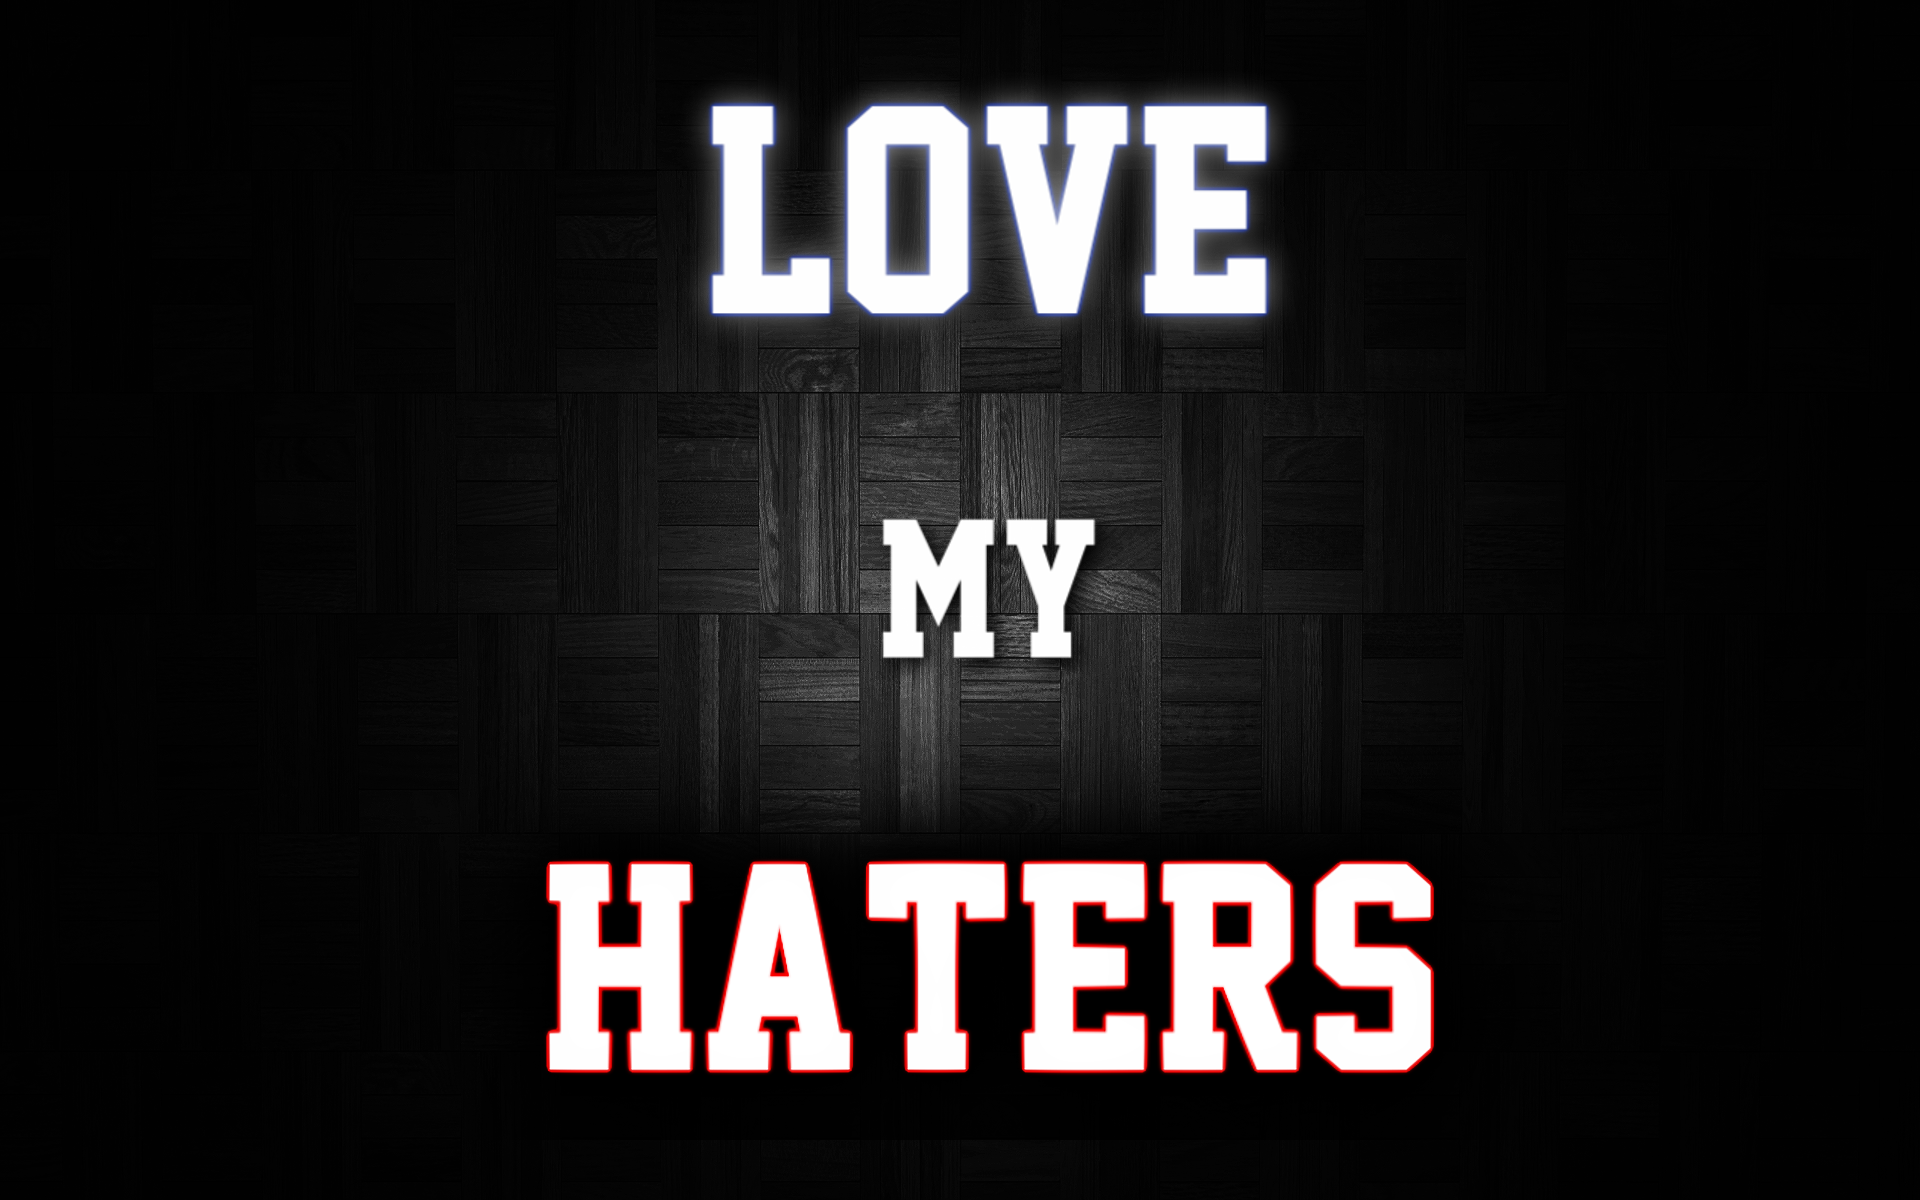 Haters Quotes Backgrounds Quotesgram